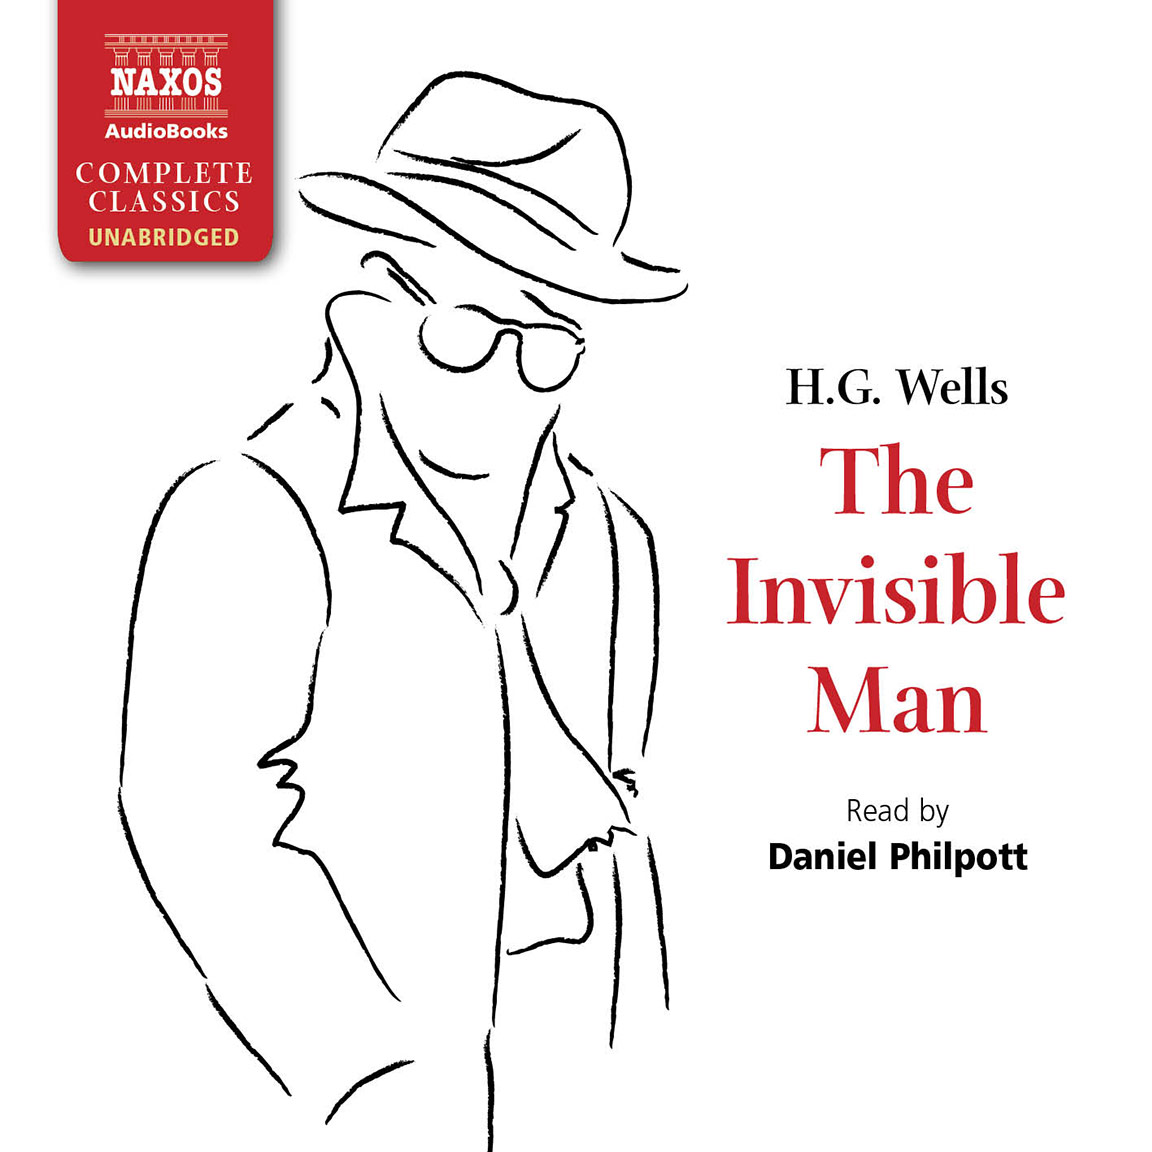 main characters of the invisible man by hg wells